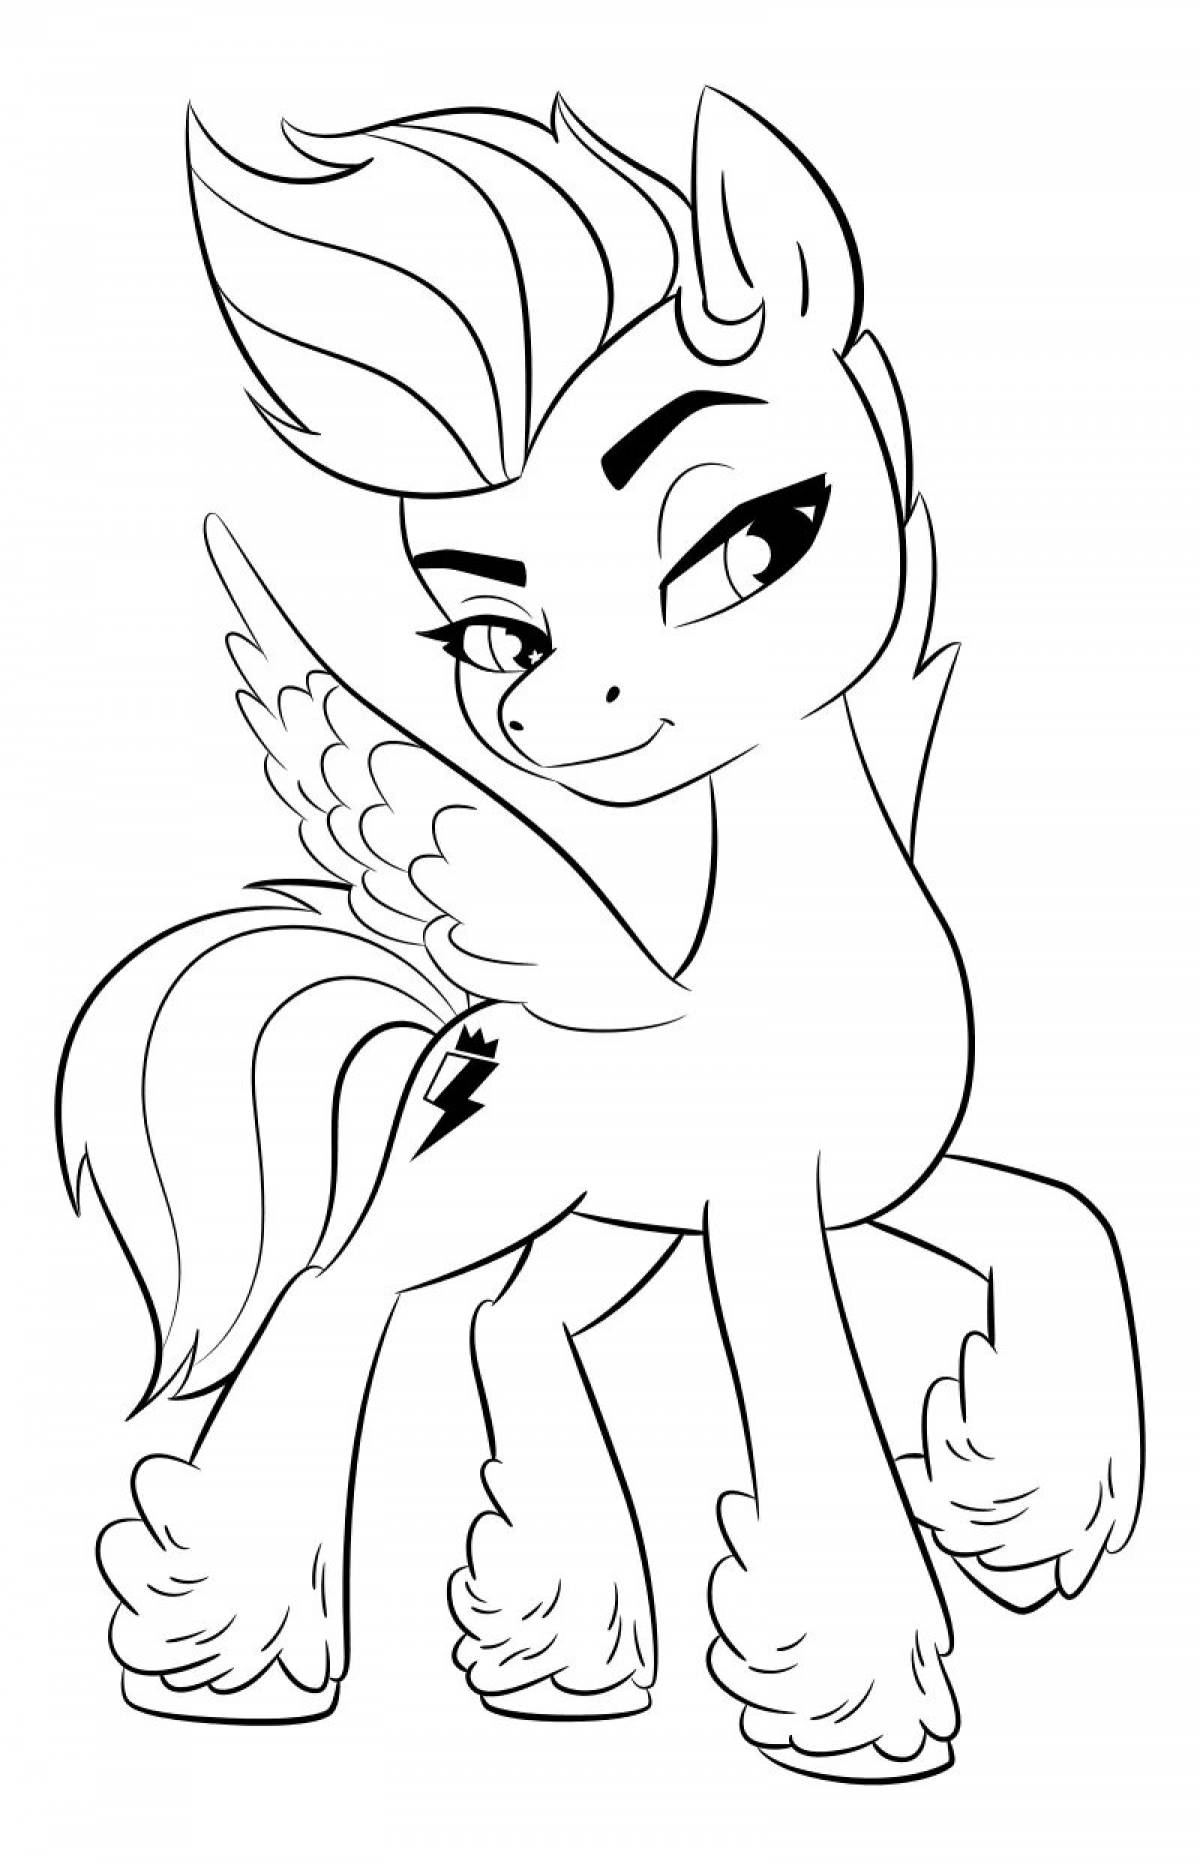 Coloring page dazzling pony izzy